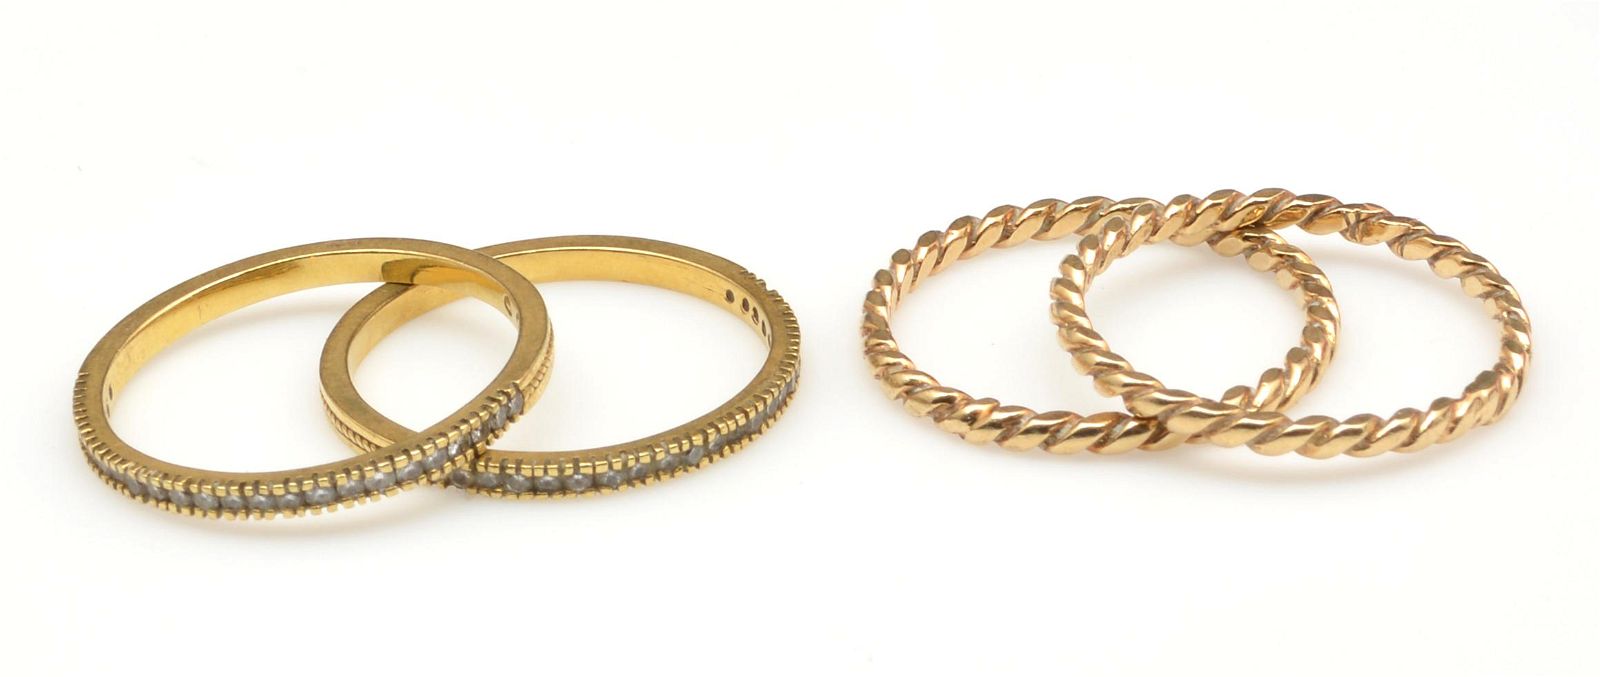 TWO PAIR OF GOLD STACKING RINGS 3d1e94